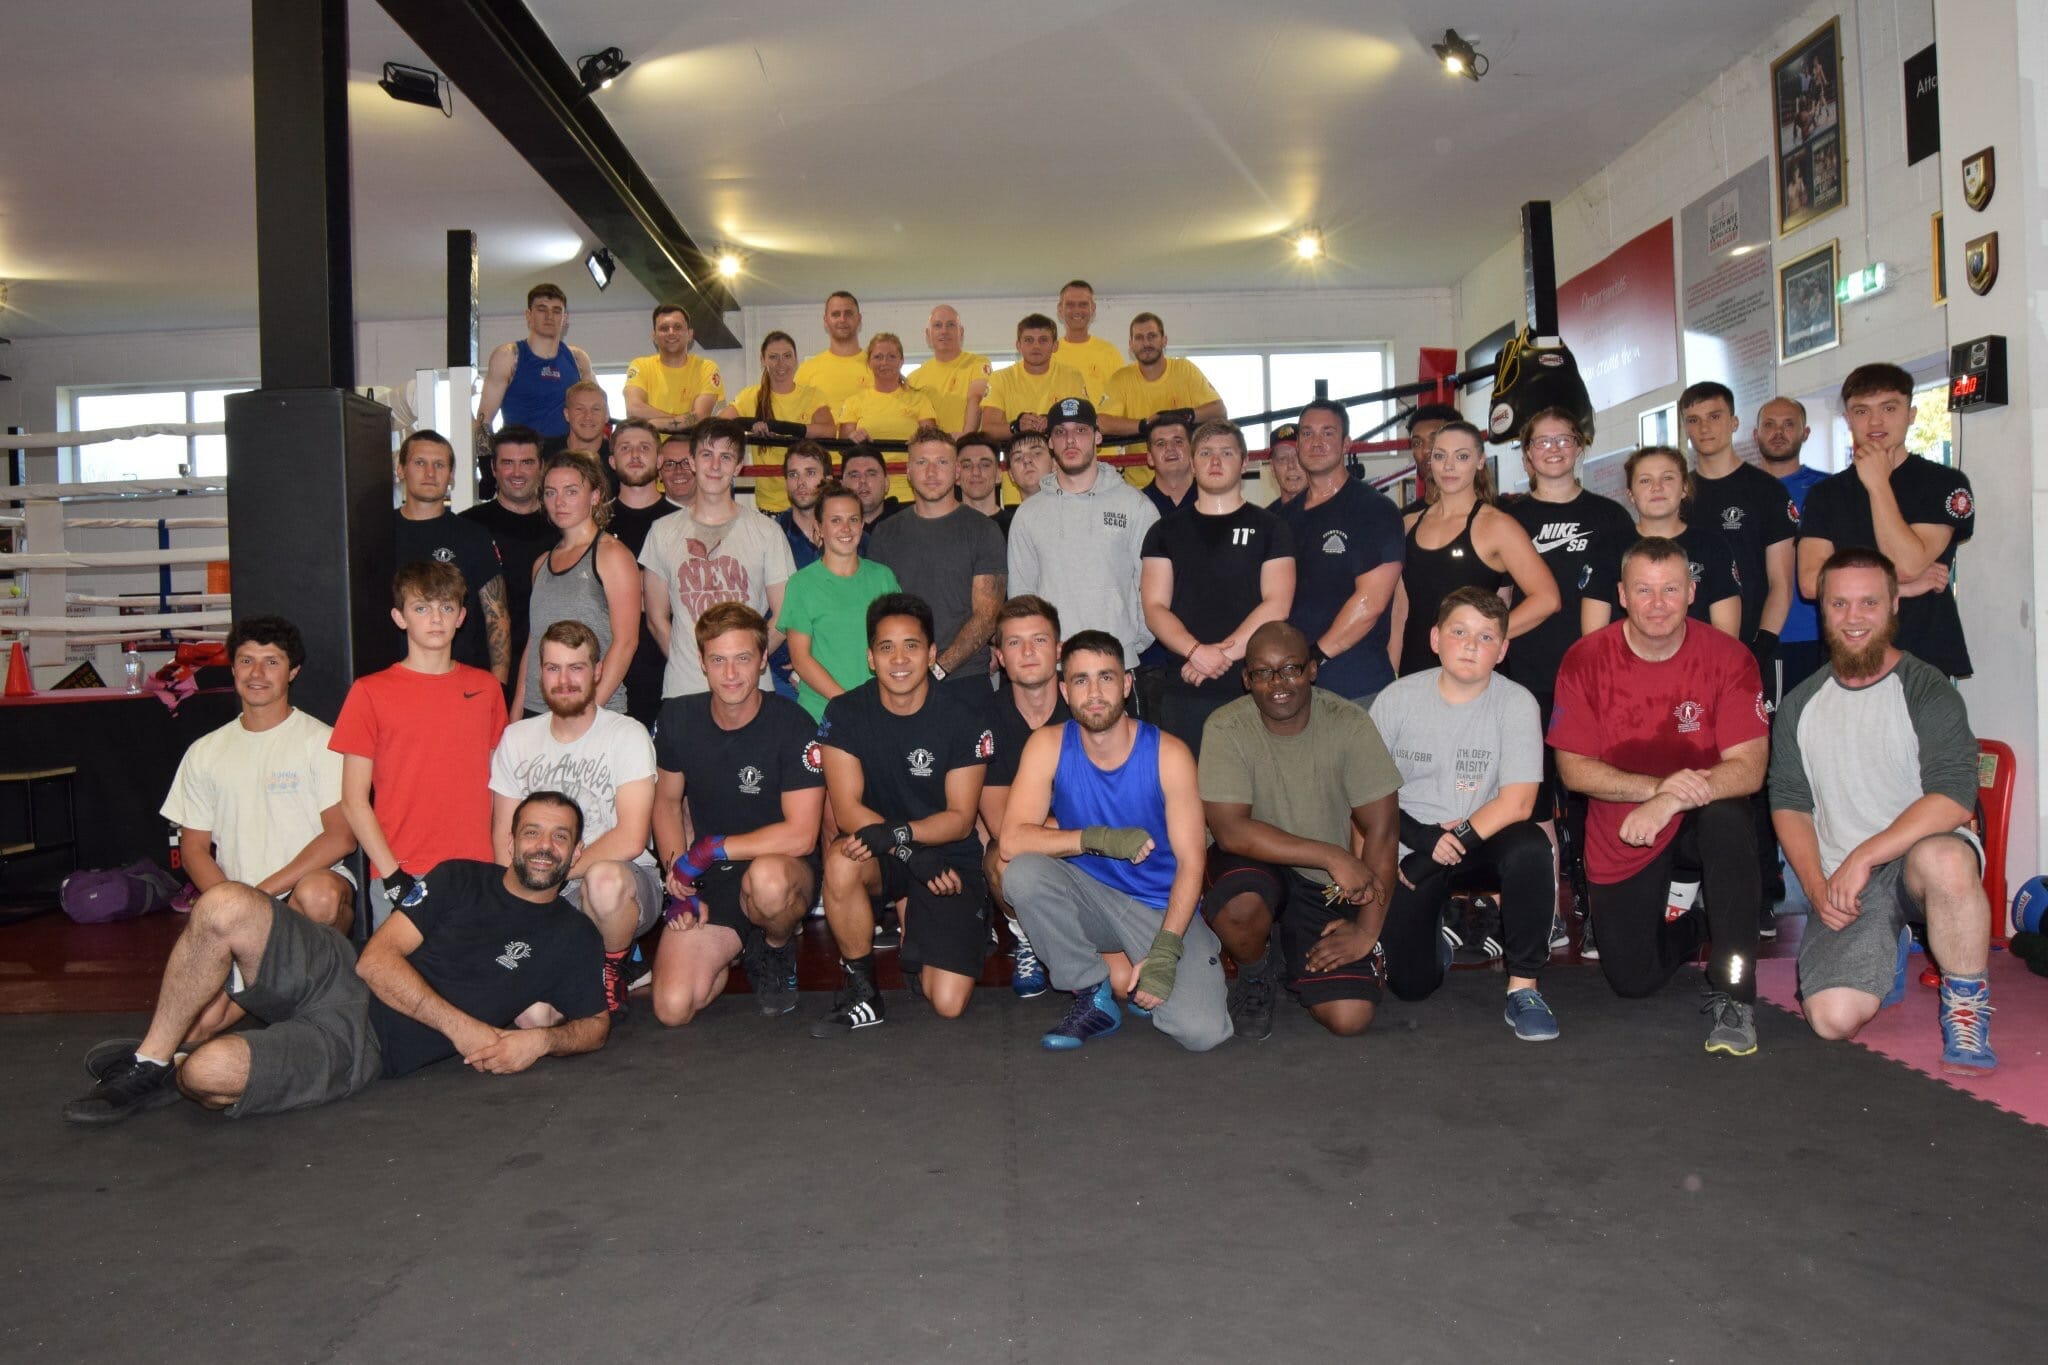 South Wye Police Boxing Academy Raise £1,500 for St Michaels Hospice